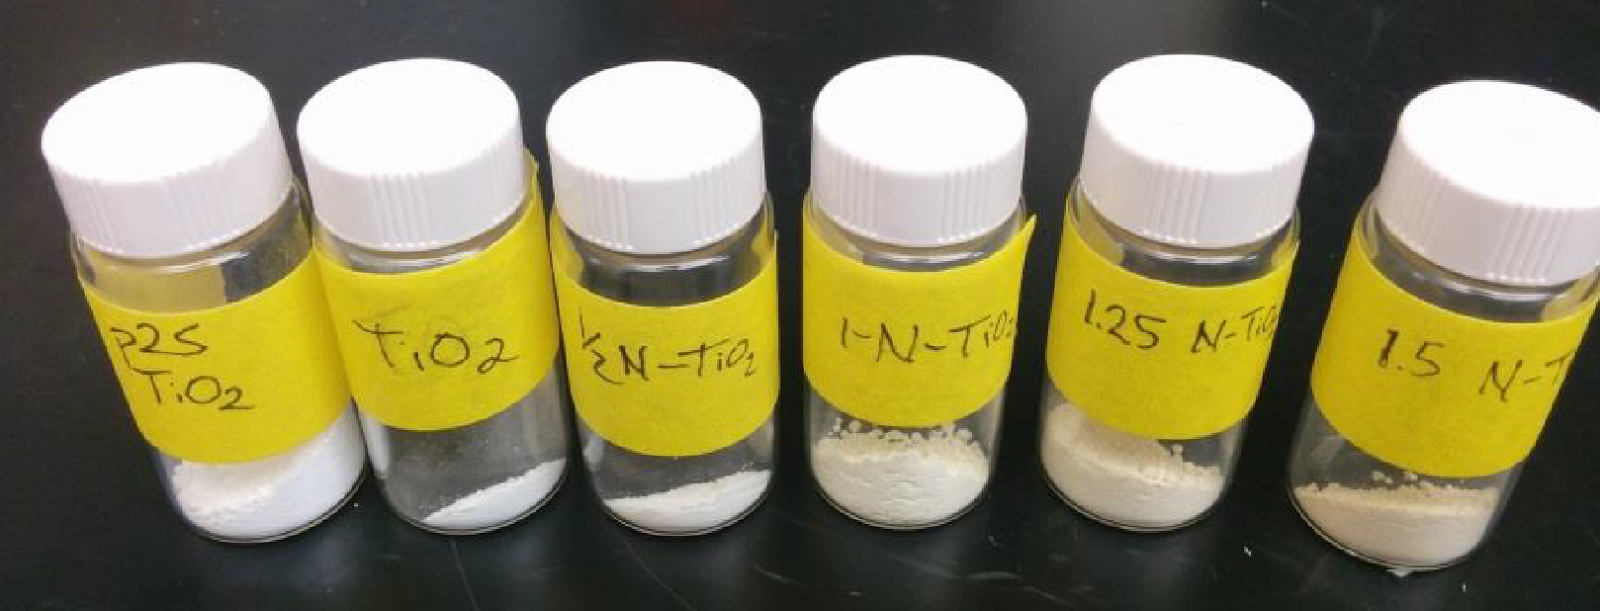 Left to right:  Changes in TiO2 color in response to increased nitrogen doping.